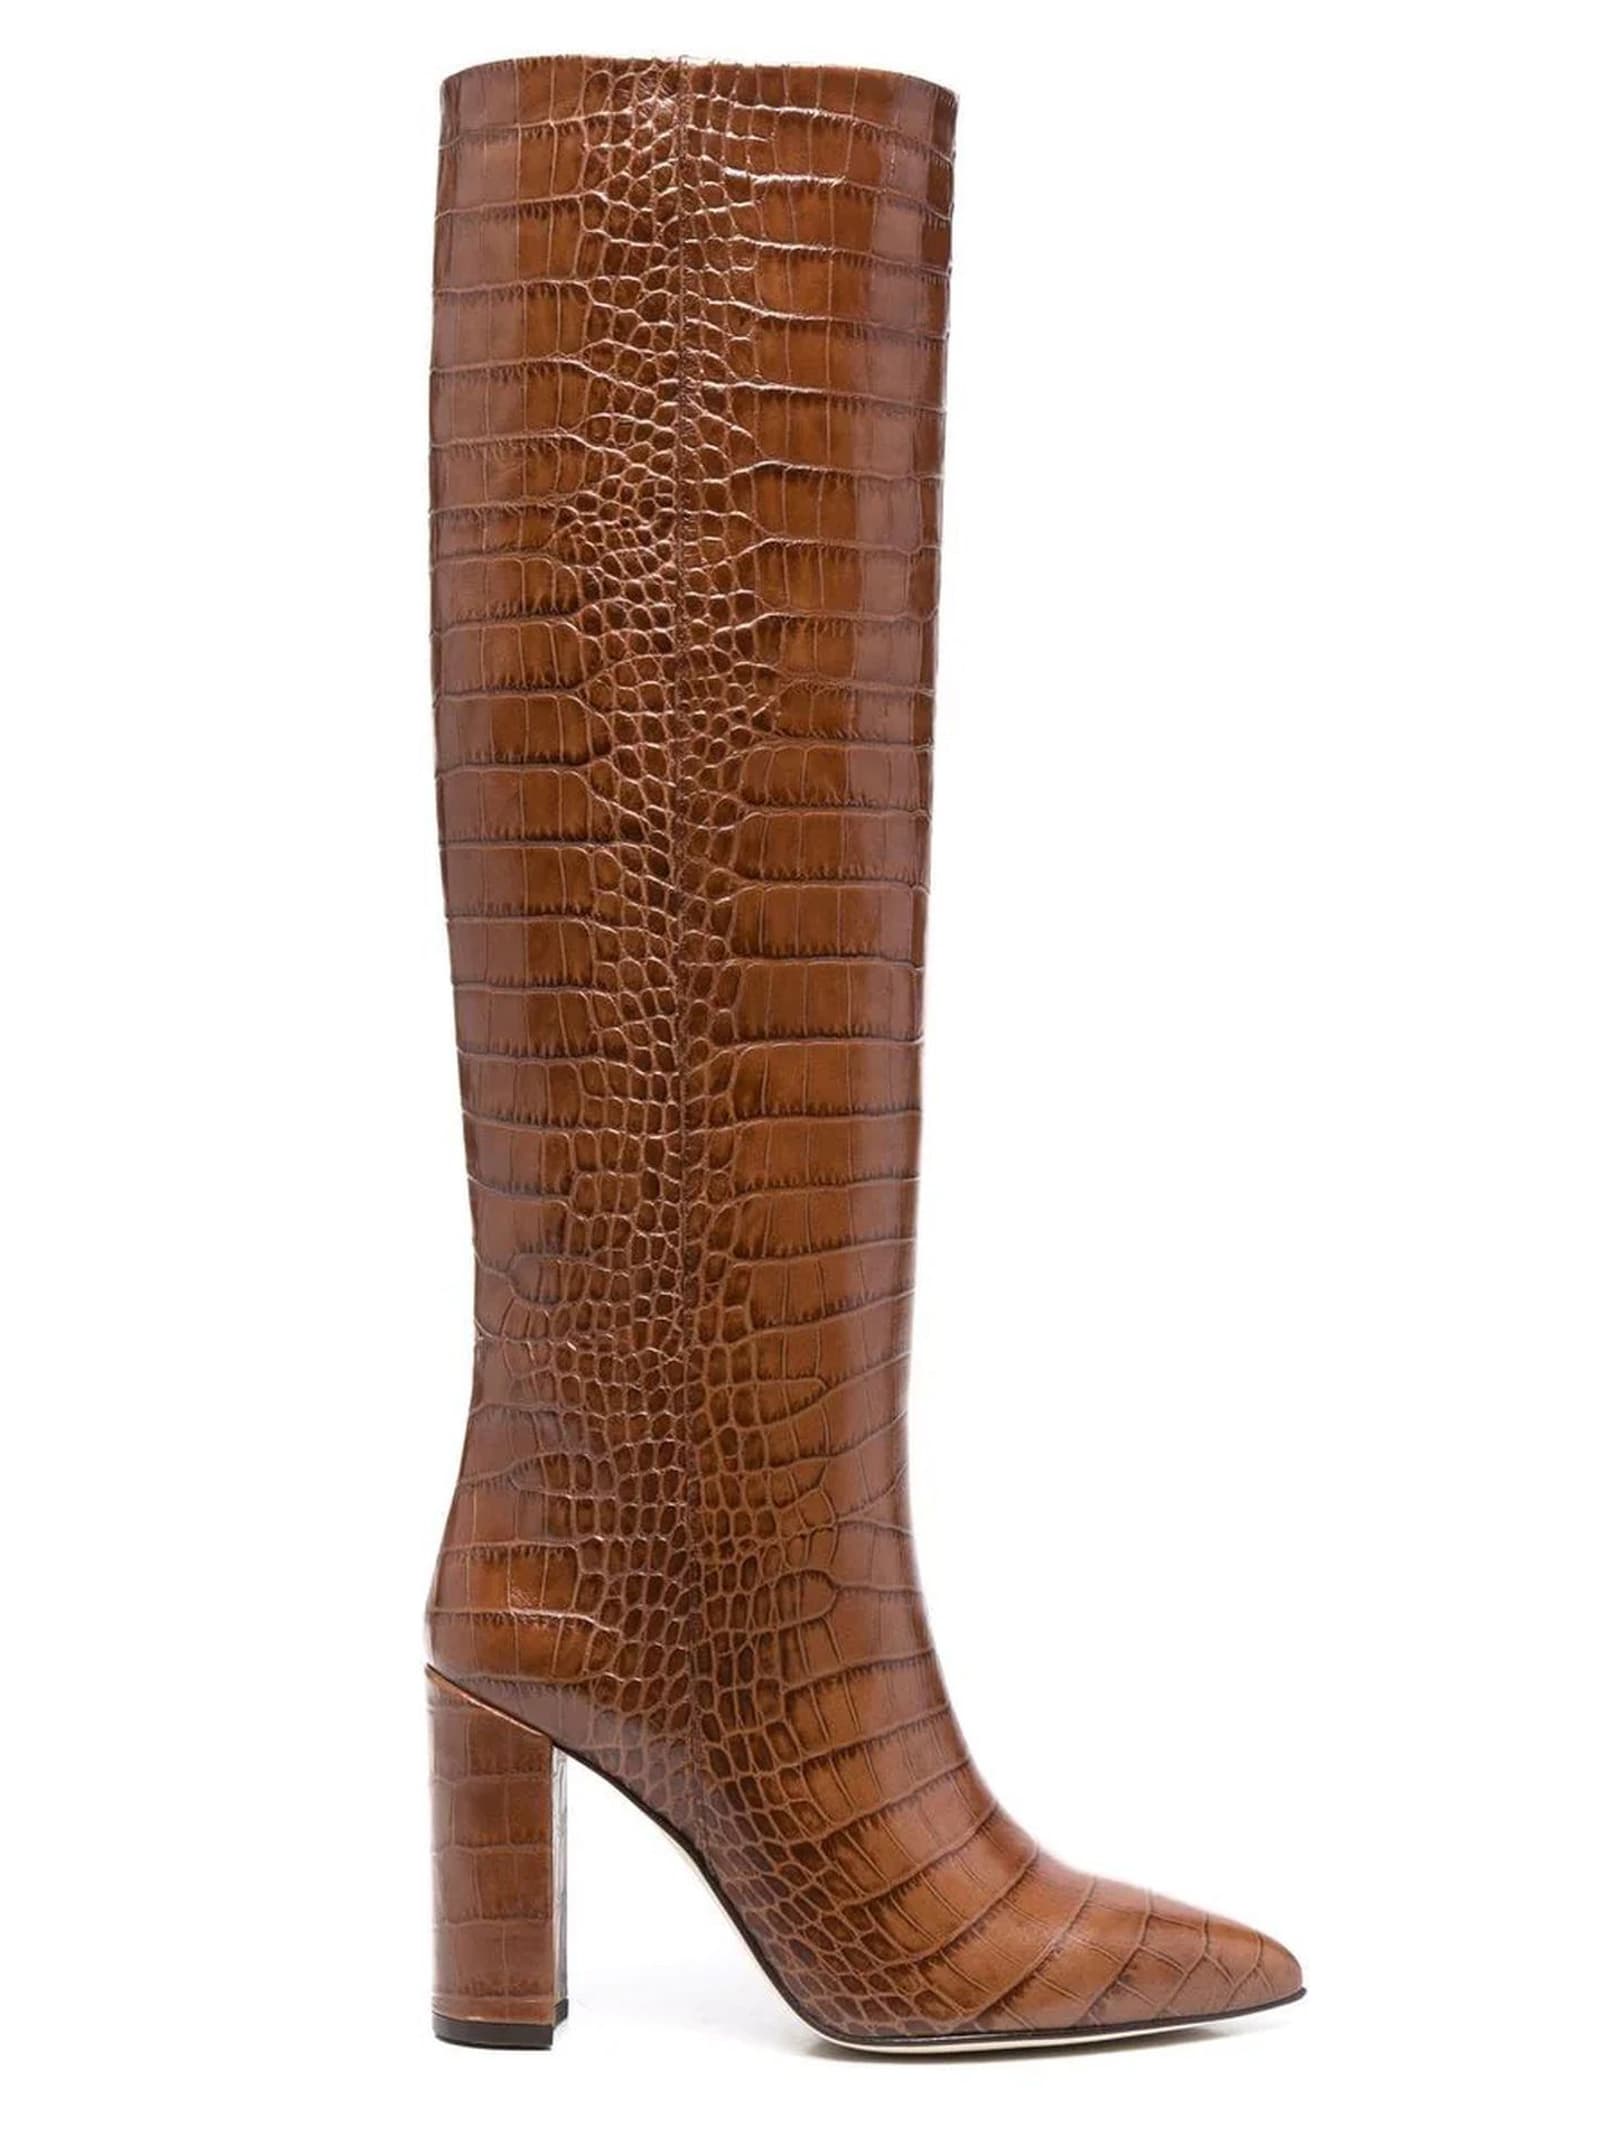 Paris Texas Brown Leather High Boots